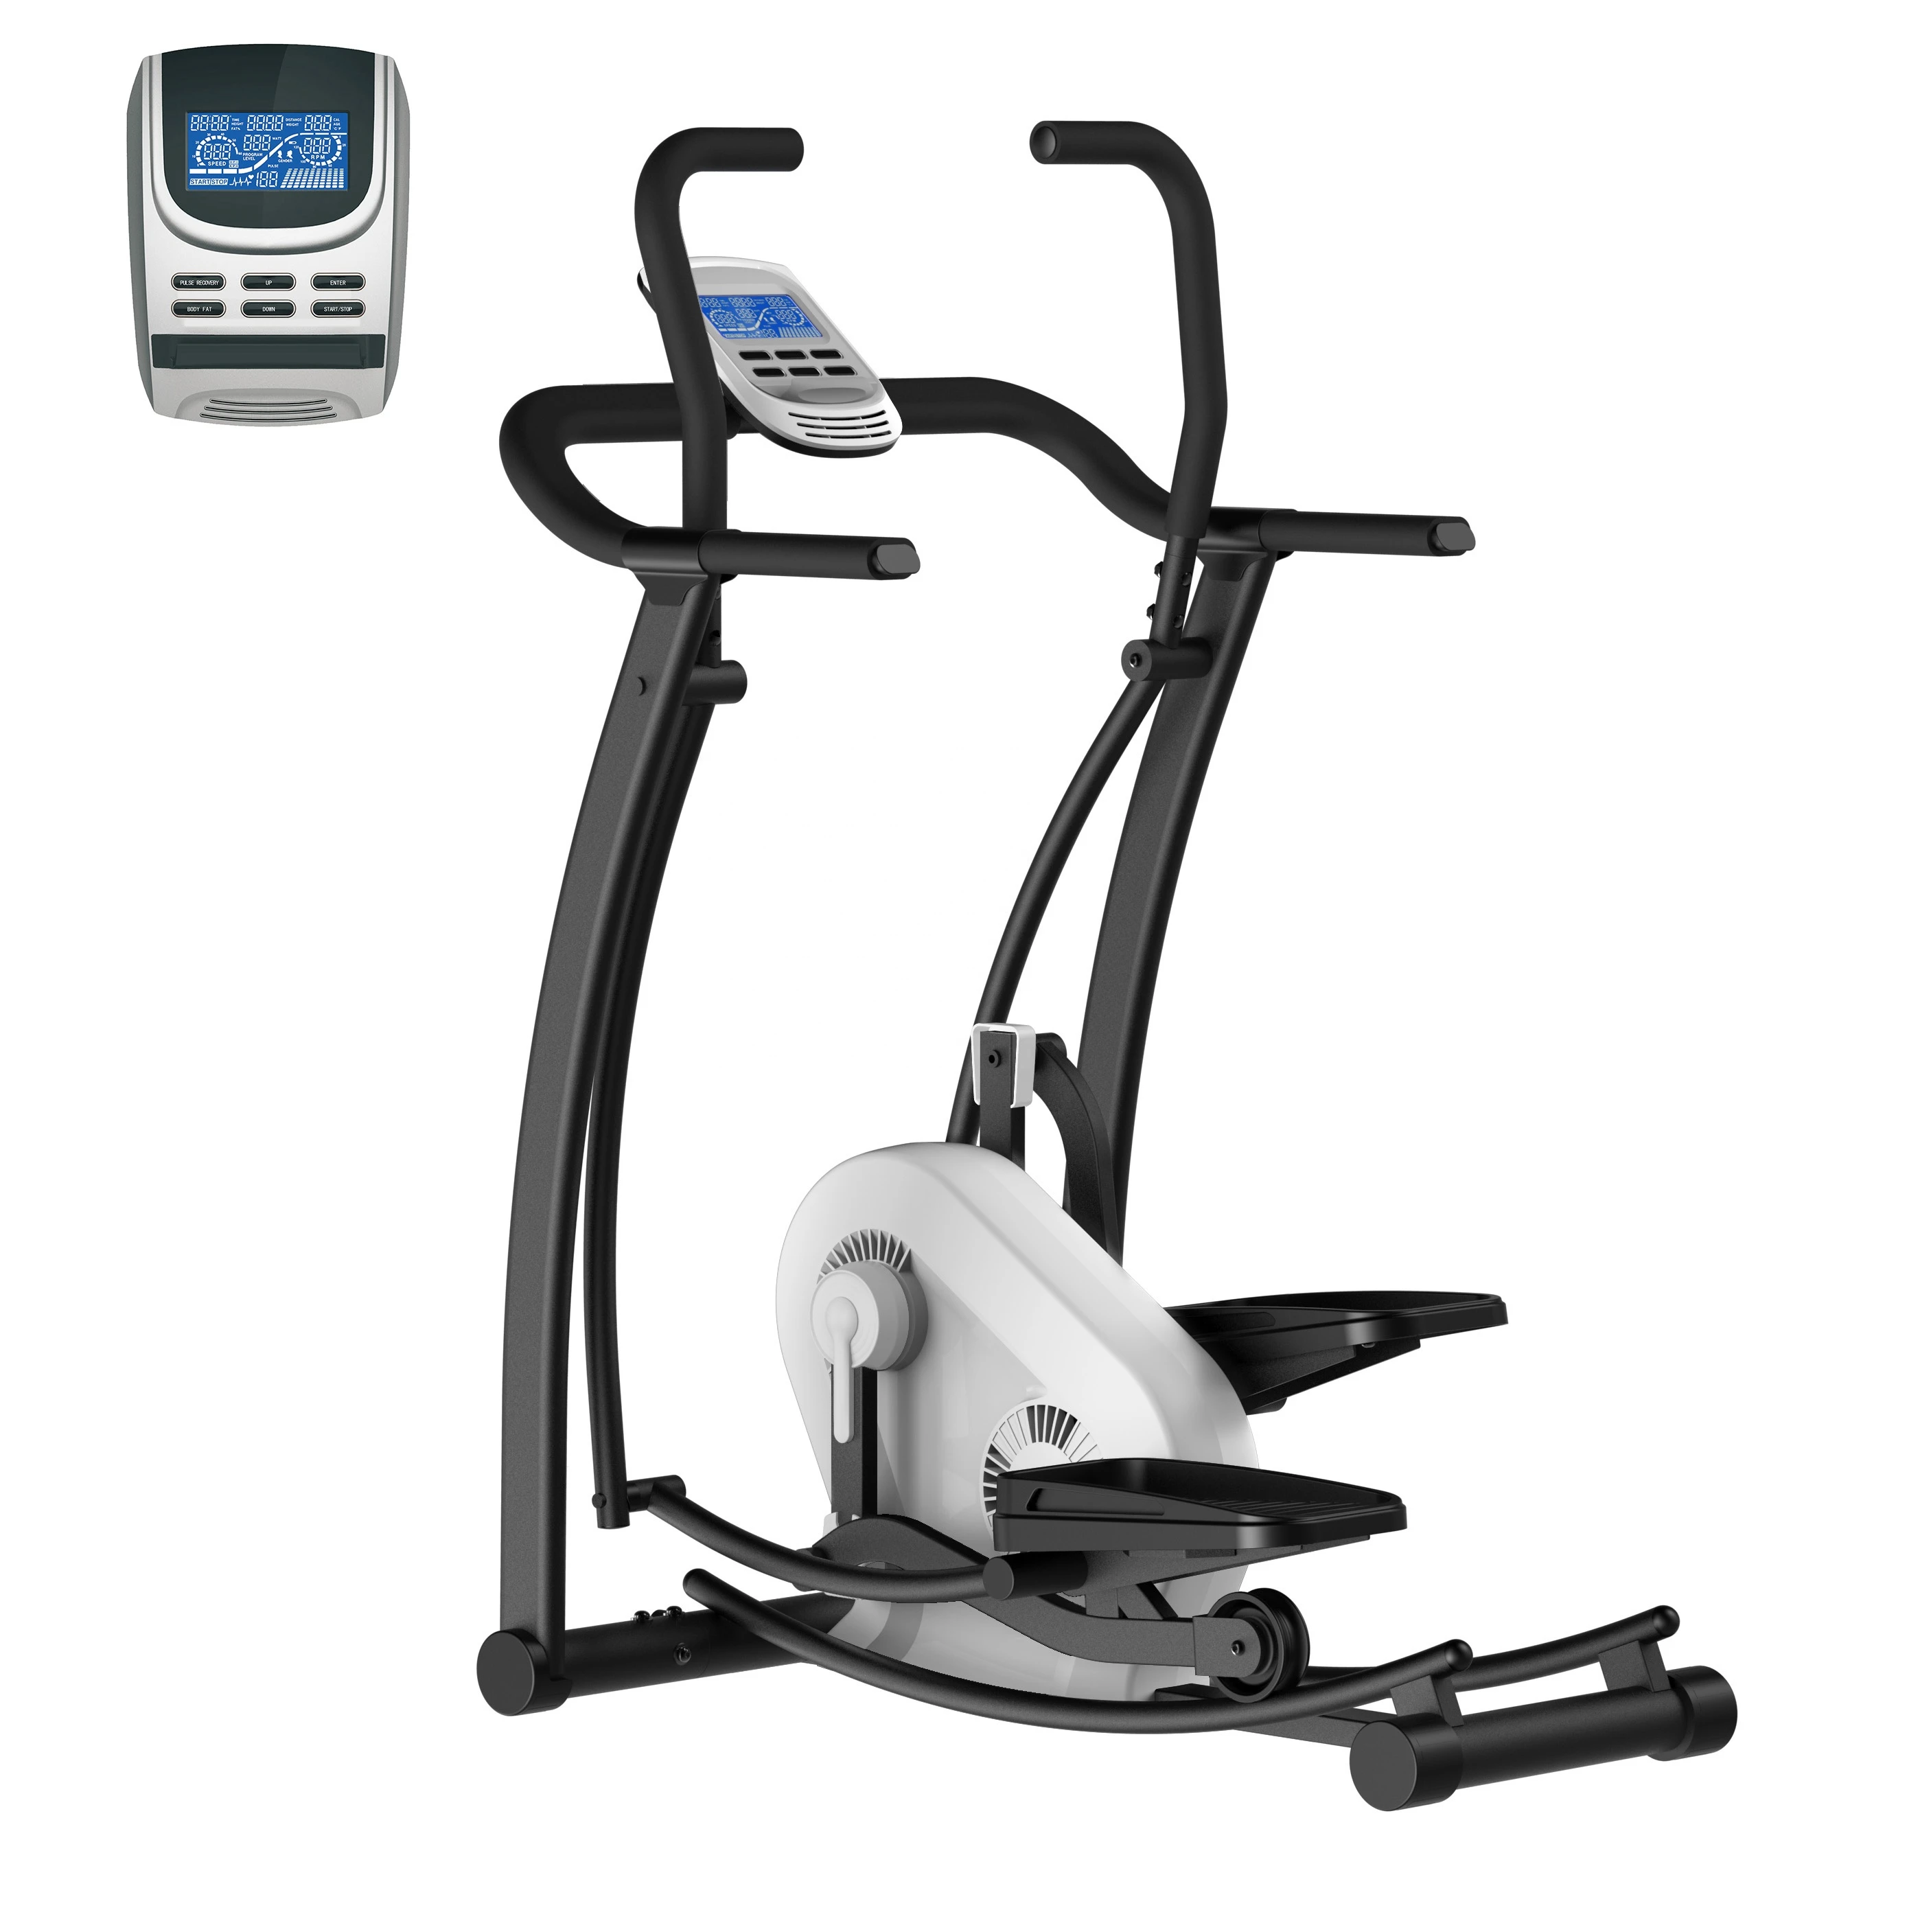 ELS-600A-02  Home Sports and healthy fitness sporting goods Self generating damping system  Cross elliptical machine